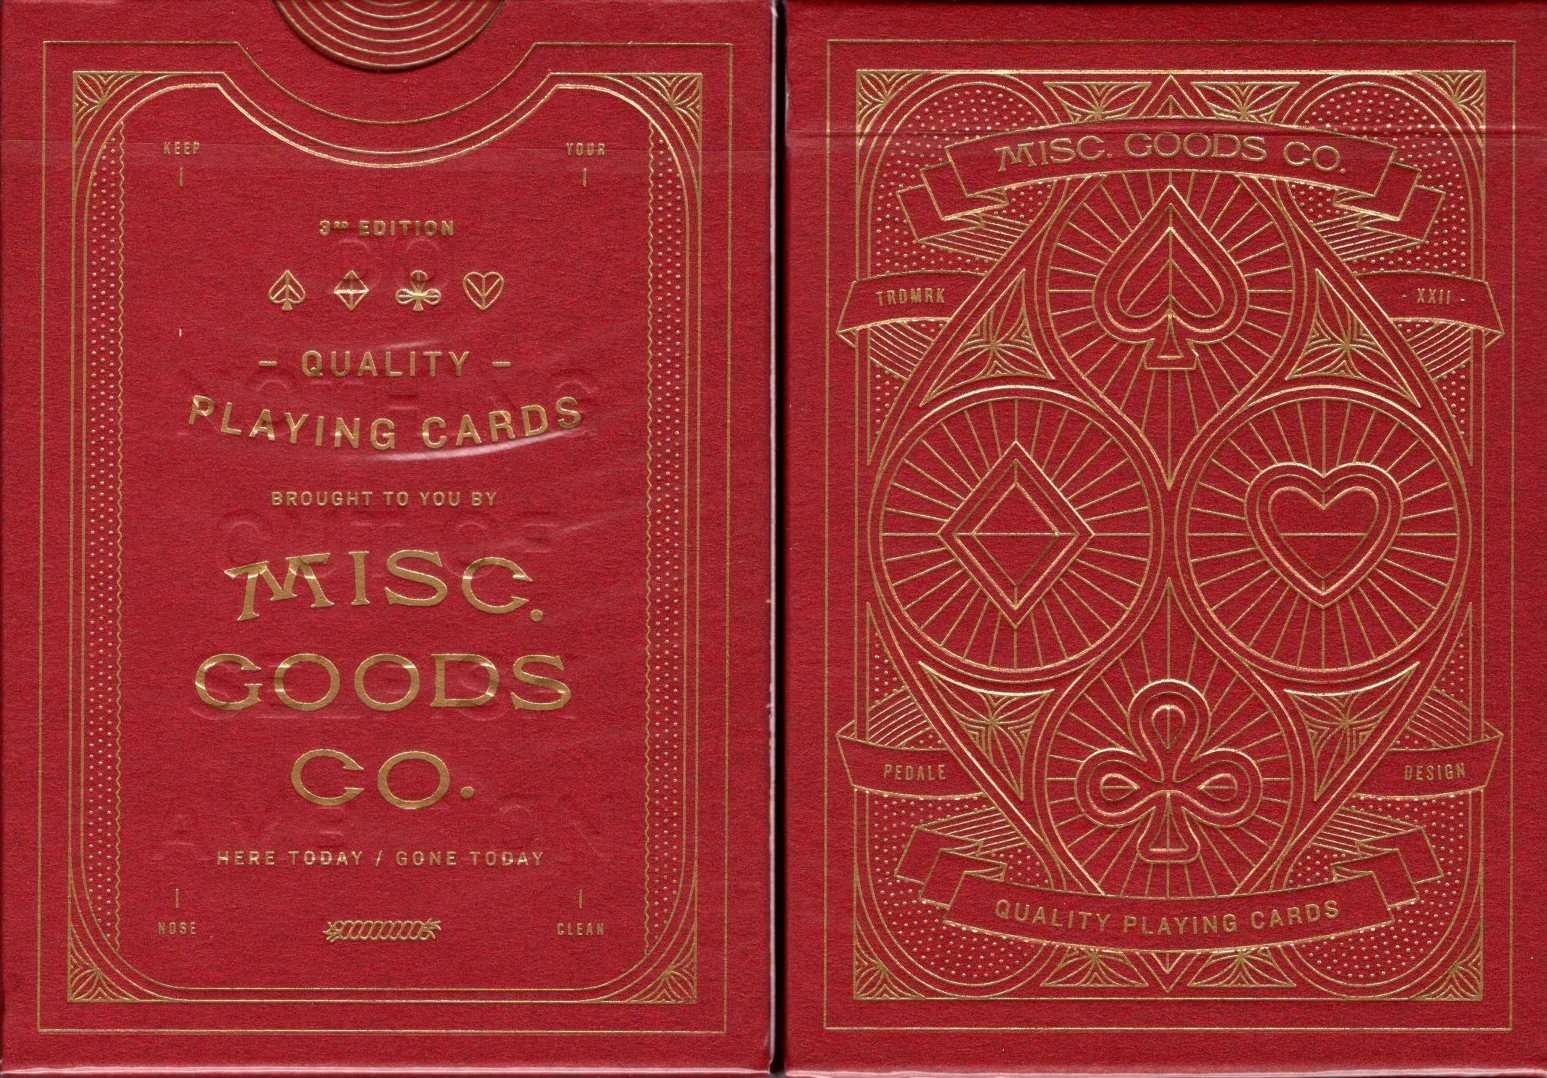 PlayingCardDecks.com-Misc. Goods Co. v3 Playing Cards USPCC: Red